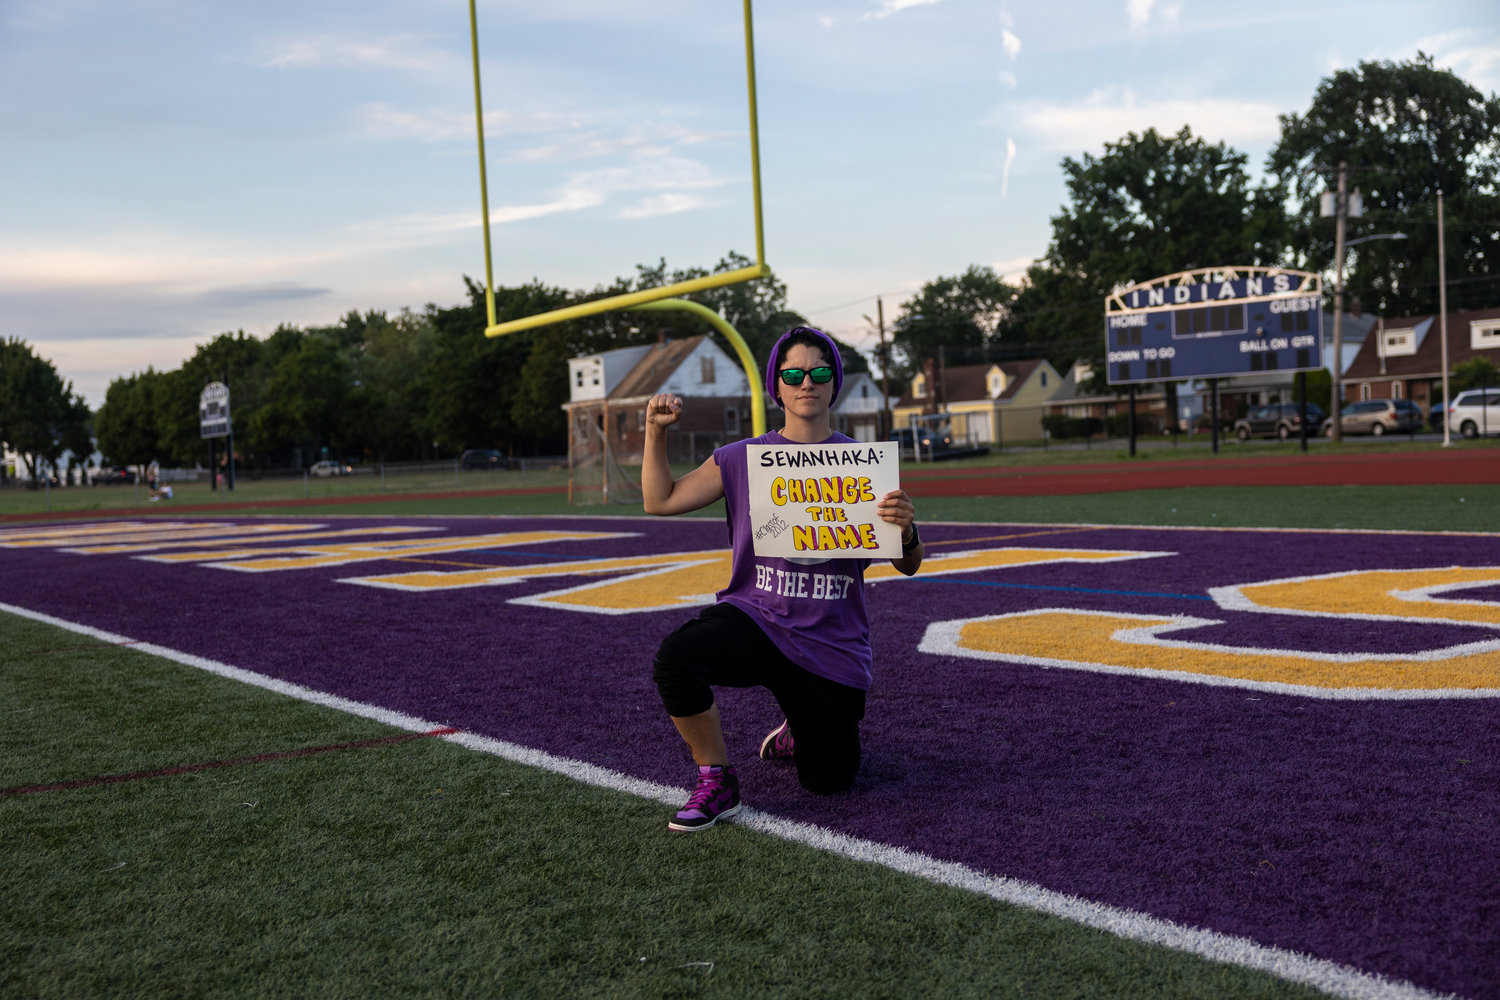 Marissa Linsalata, a 2012 graduate of Sewanhaka High School, took a knee on the school’s football field and called for the replacement of the Indian mascot.